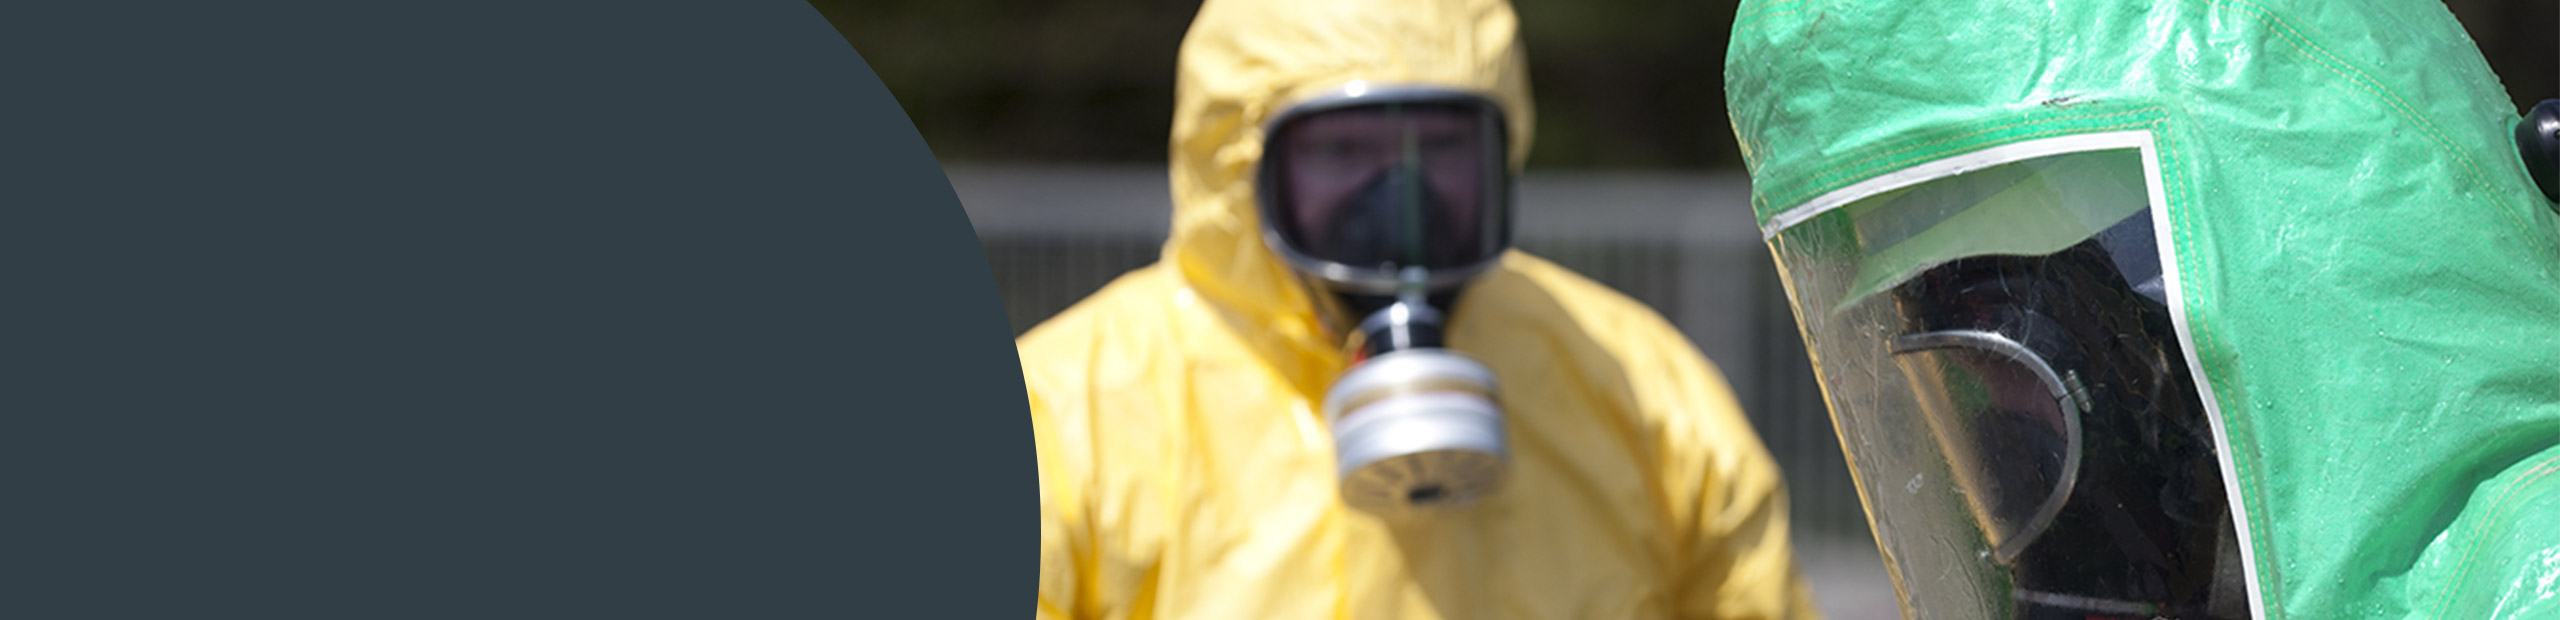 Chemical Spill Cleaning